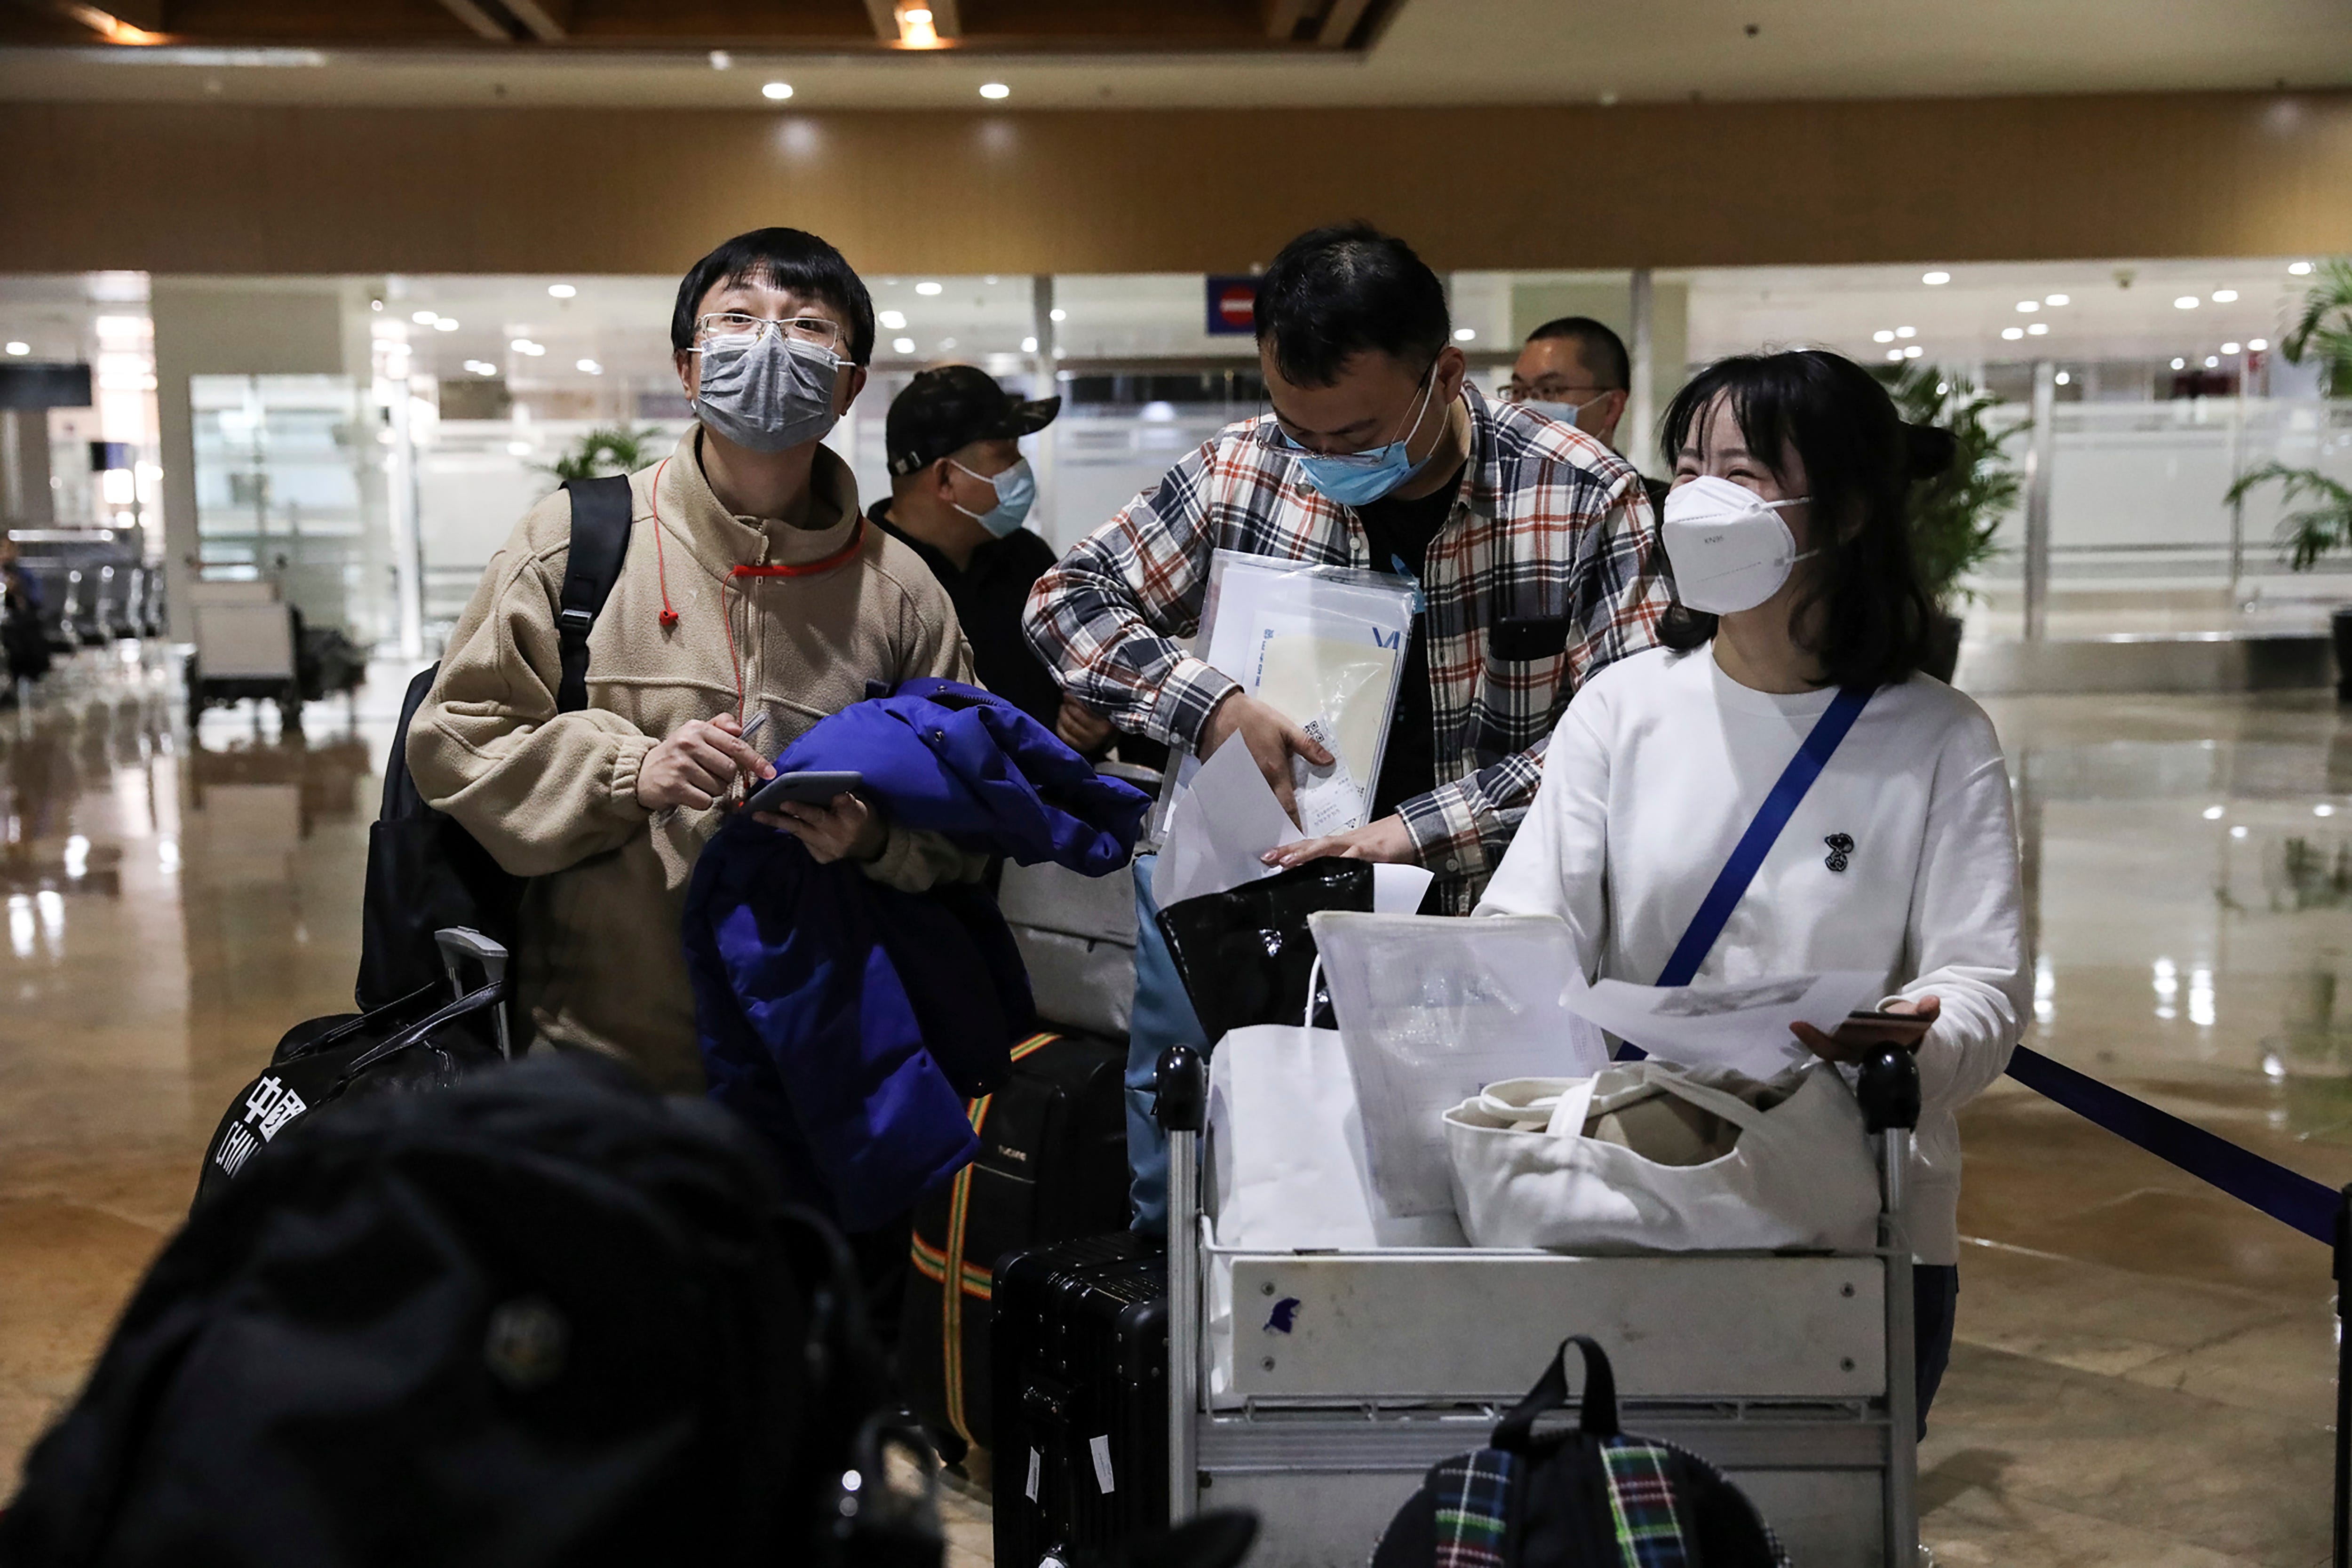 Philippines travel reopens, but CDC discourages visiting